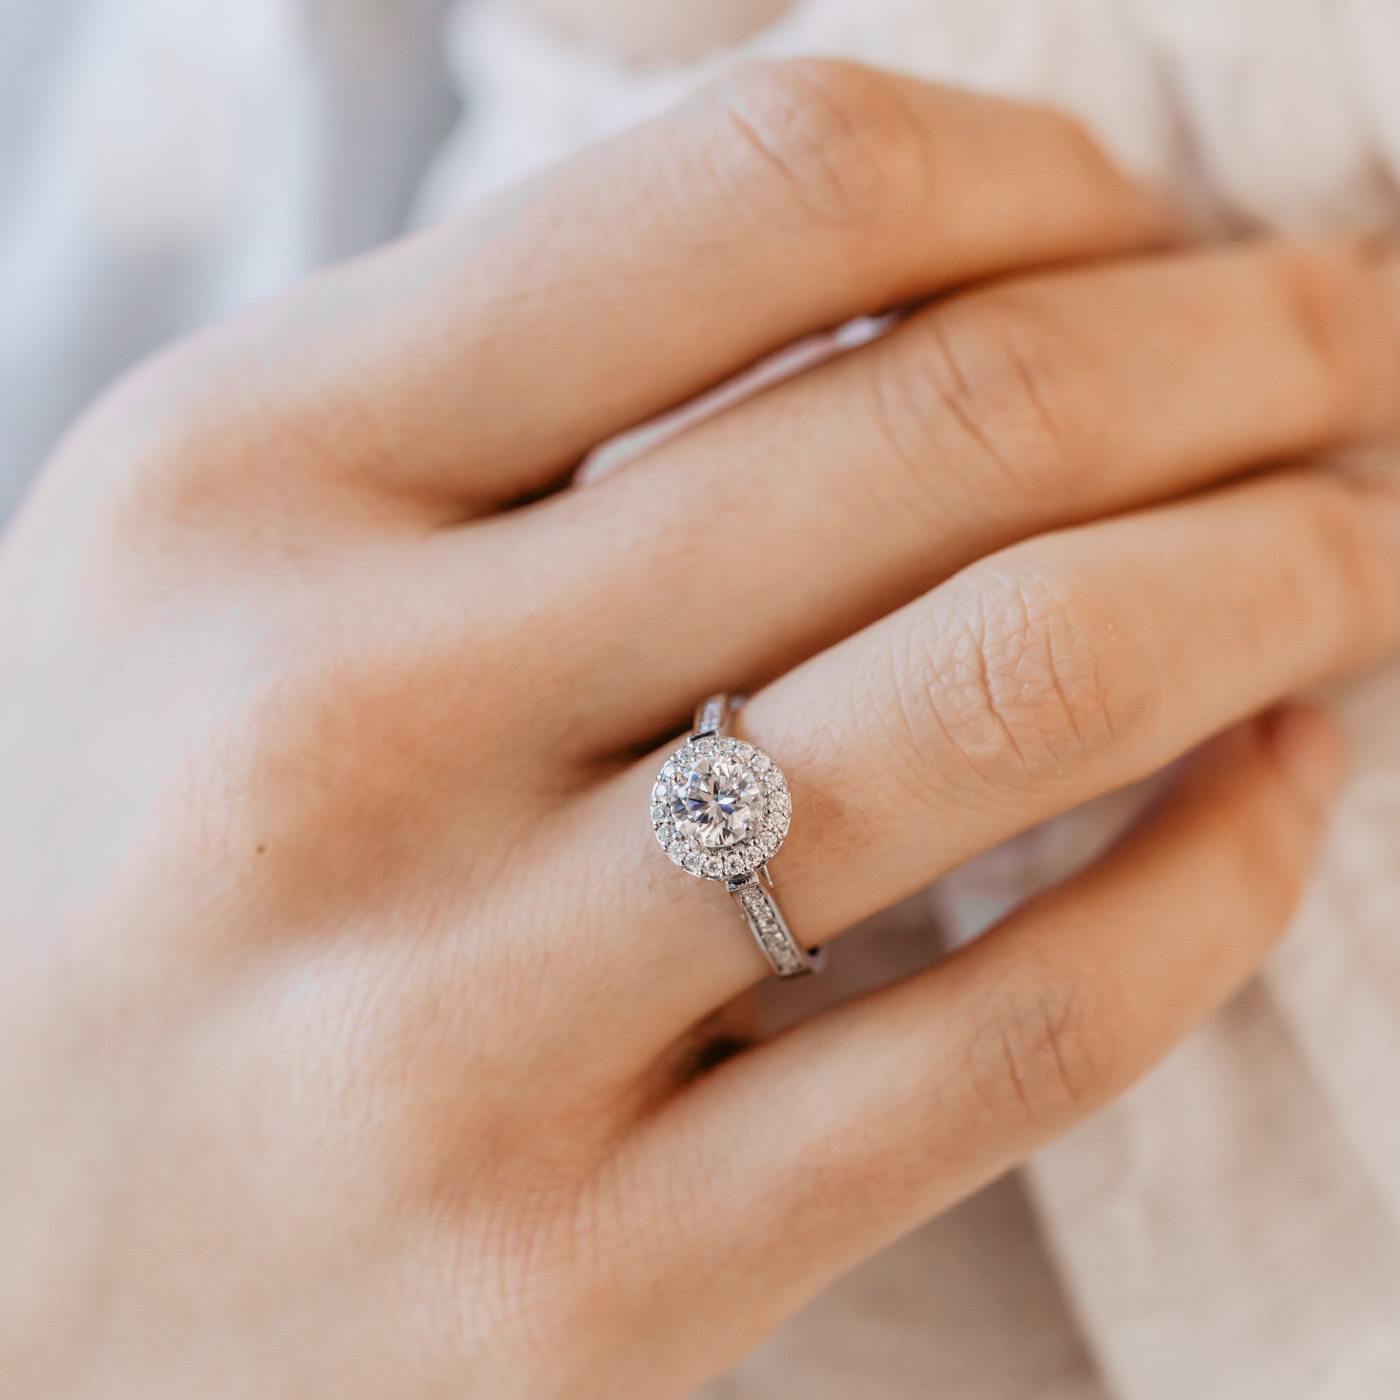 Ethica Diamonds Halo Ring featuring a round brilliant centre diamond, and diamonds running down the shoulders.